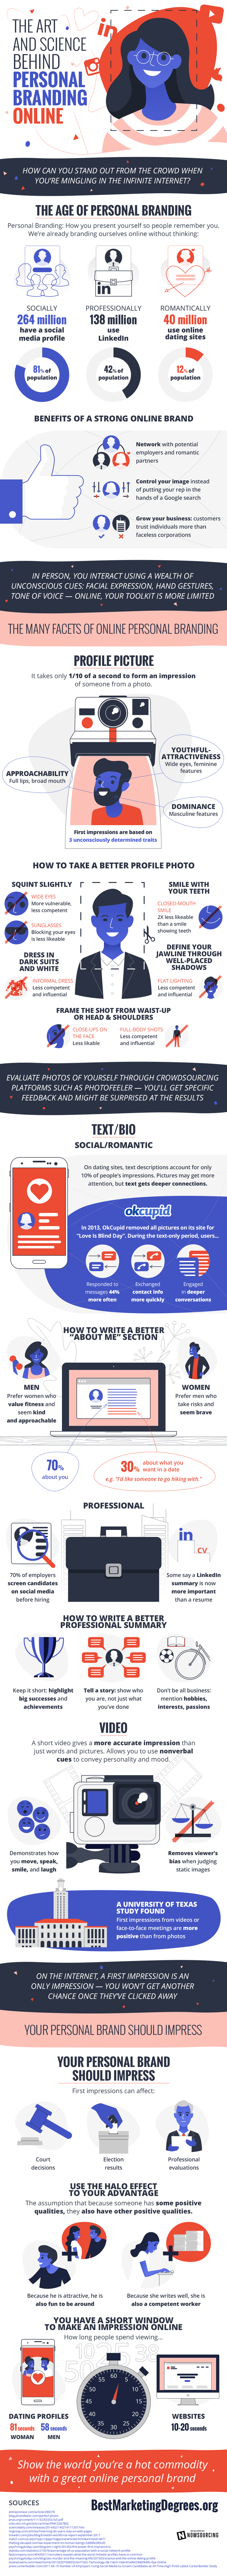 The Art and Science Behind Personal Branding Online - #infographic